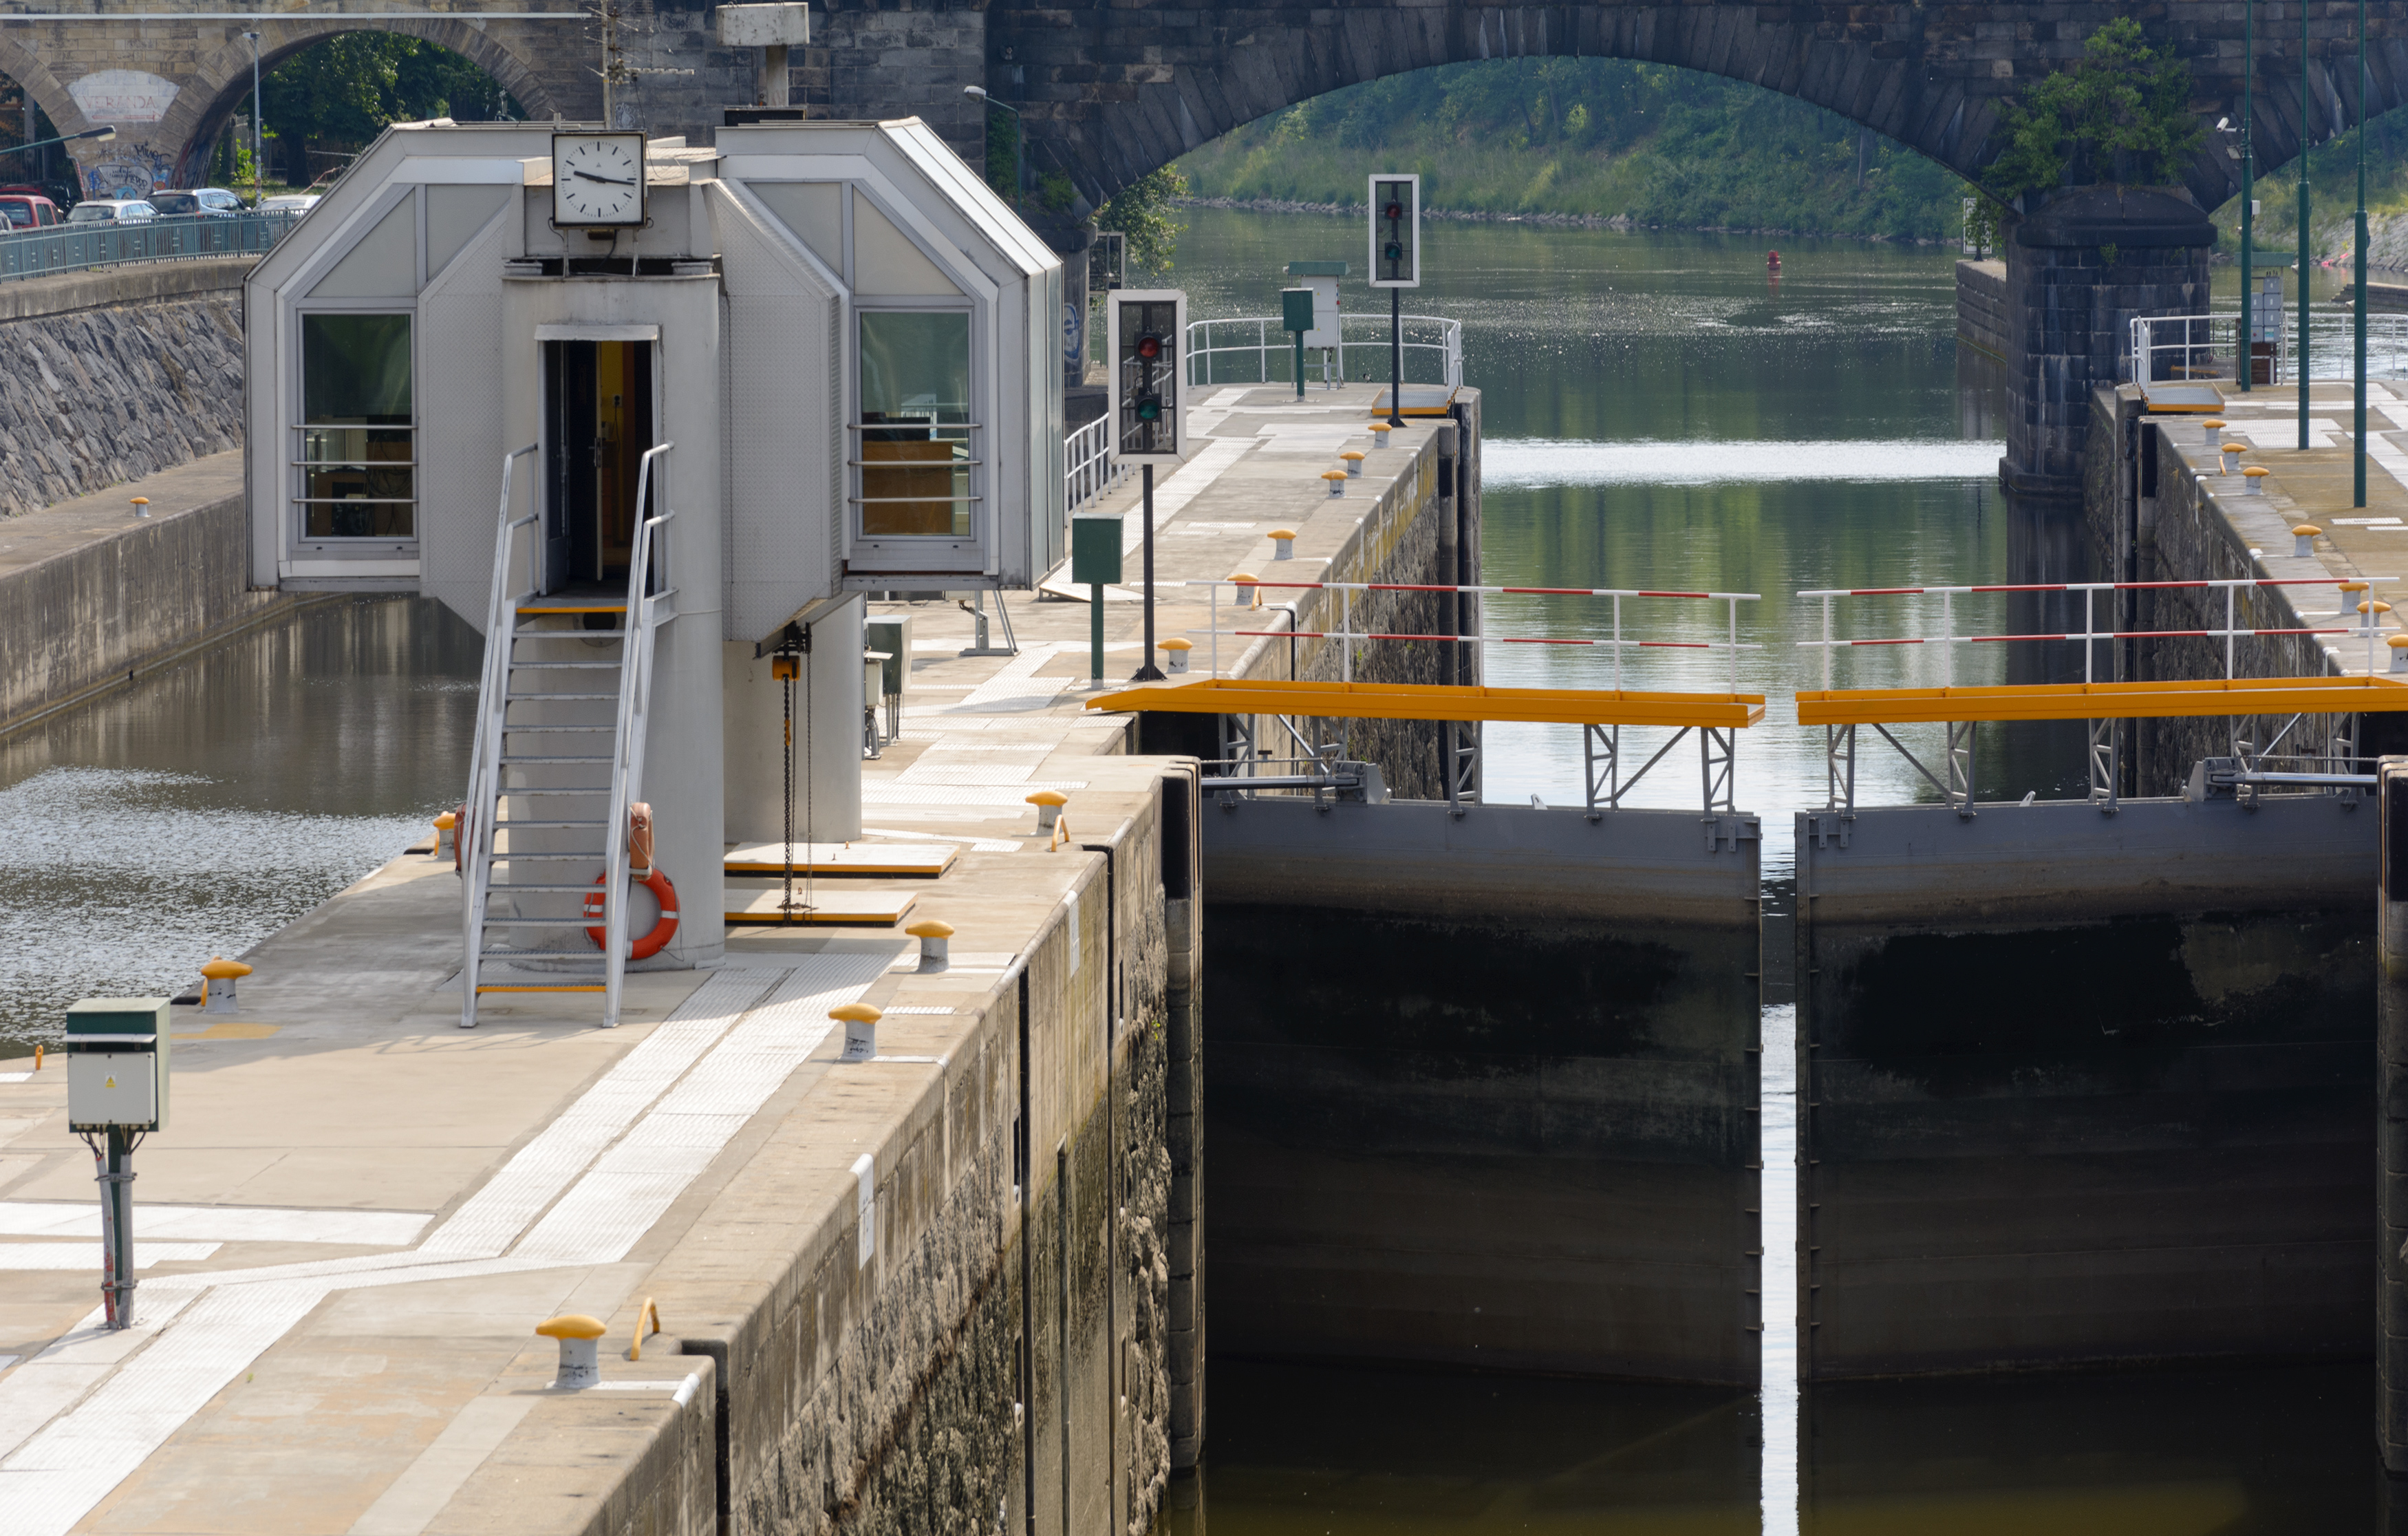 The Lock Chamber On The River | Free Stock Photo | LibreShot